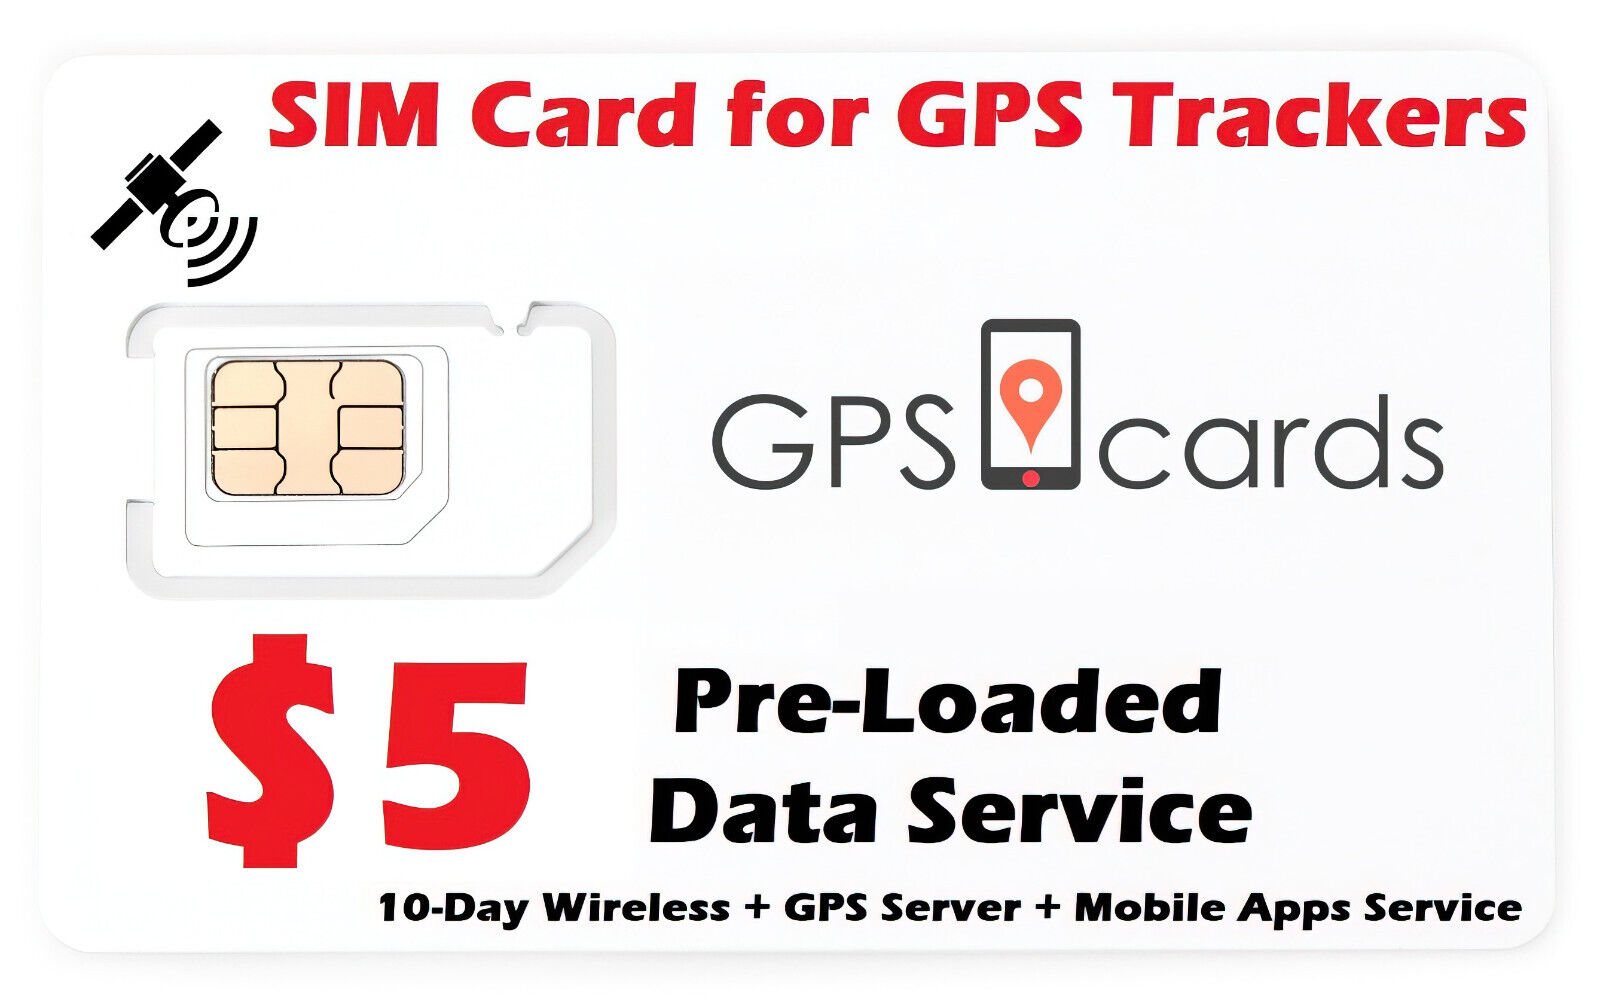 SIM CARD for Real-time GPS Tracker Tracking Device GSM Car/Motorcycle Anti Theft